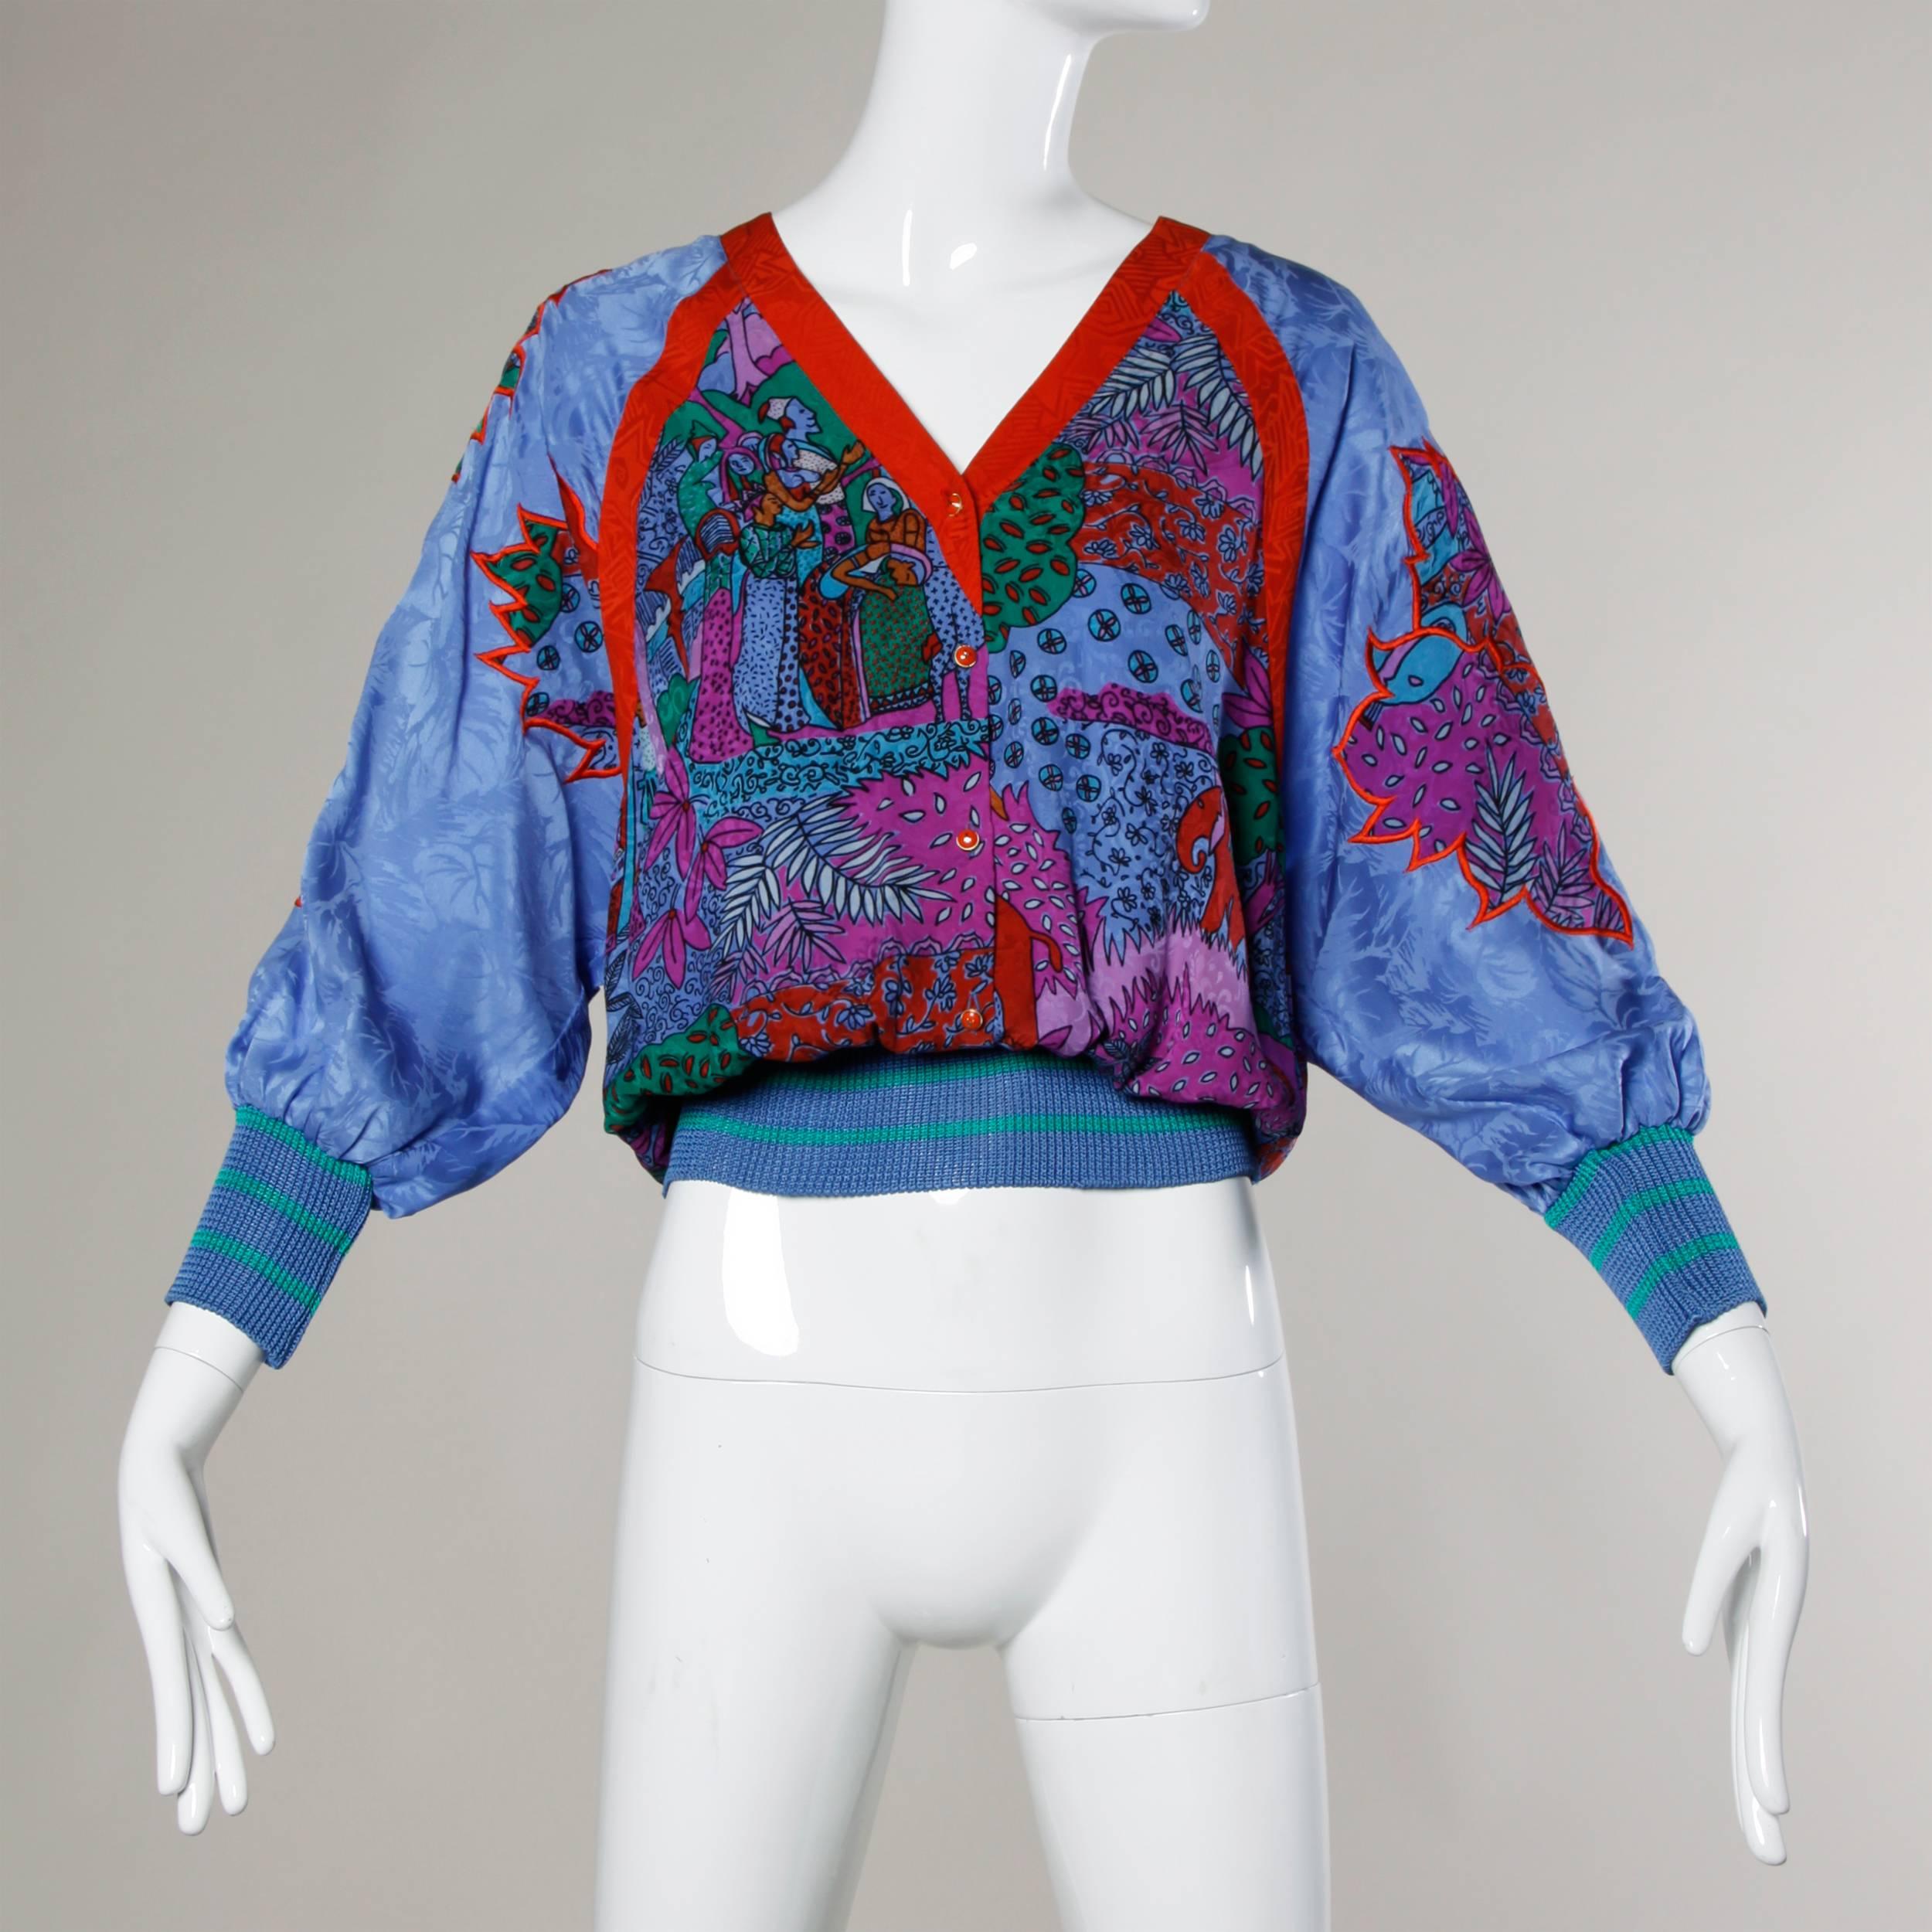 Silk patchwork pullover blouse by Diane Fres with a vibrant bohemian print and blouson sleeves.

Details:

Unlined
Front Button Closure
Marked Size: Not Marked
Estimated Size: S-M
Color: Red Orange/ Blue Lavender/ Multicolor
Fabric: 100%